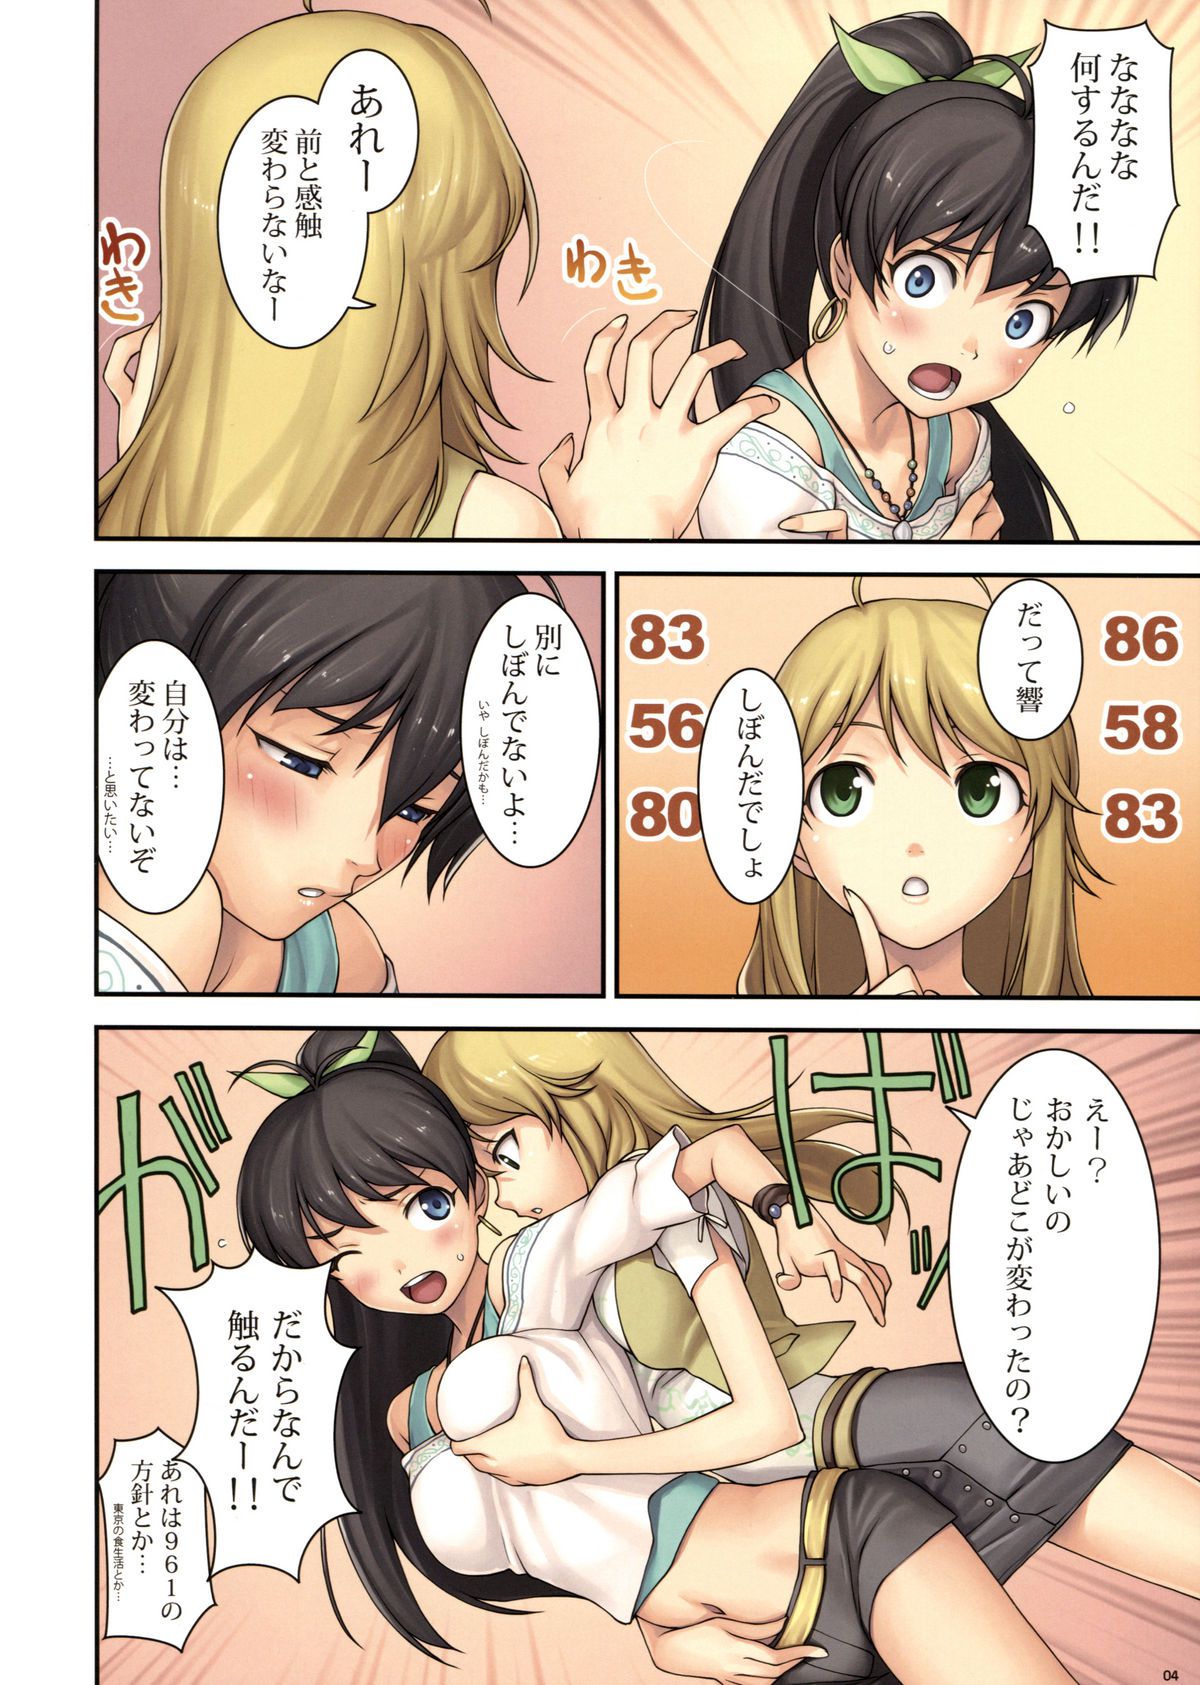 Erotic healing that you flirt with other girls Yuri lesbian pictures vol.2 8